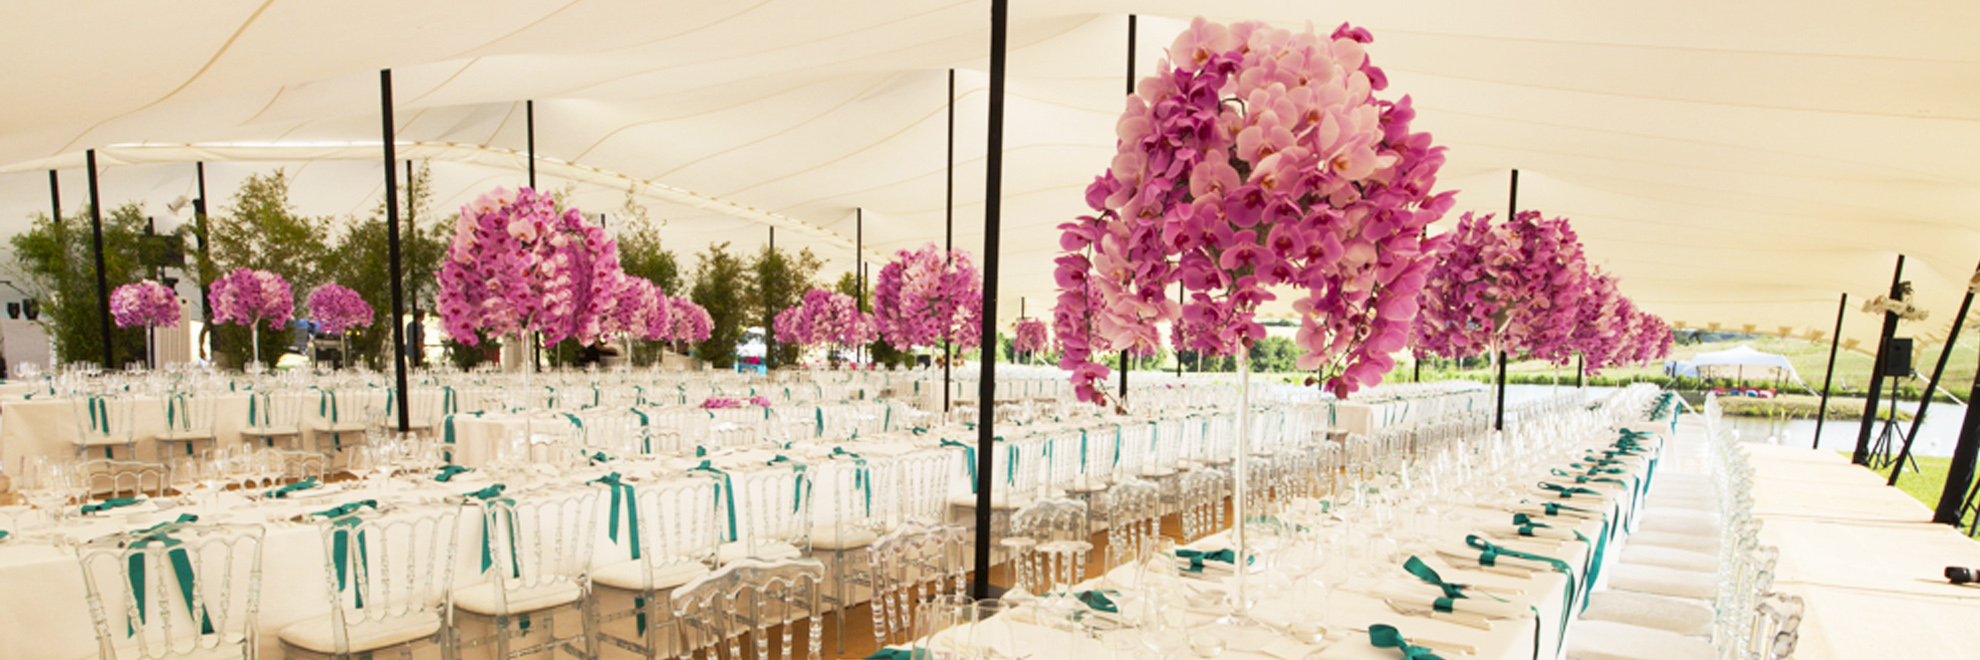 White stretch tent long tables, bright pink flowers